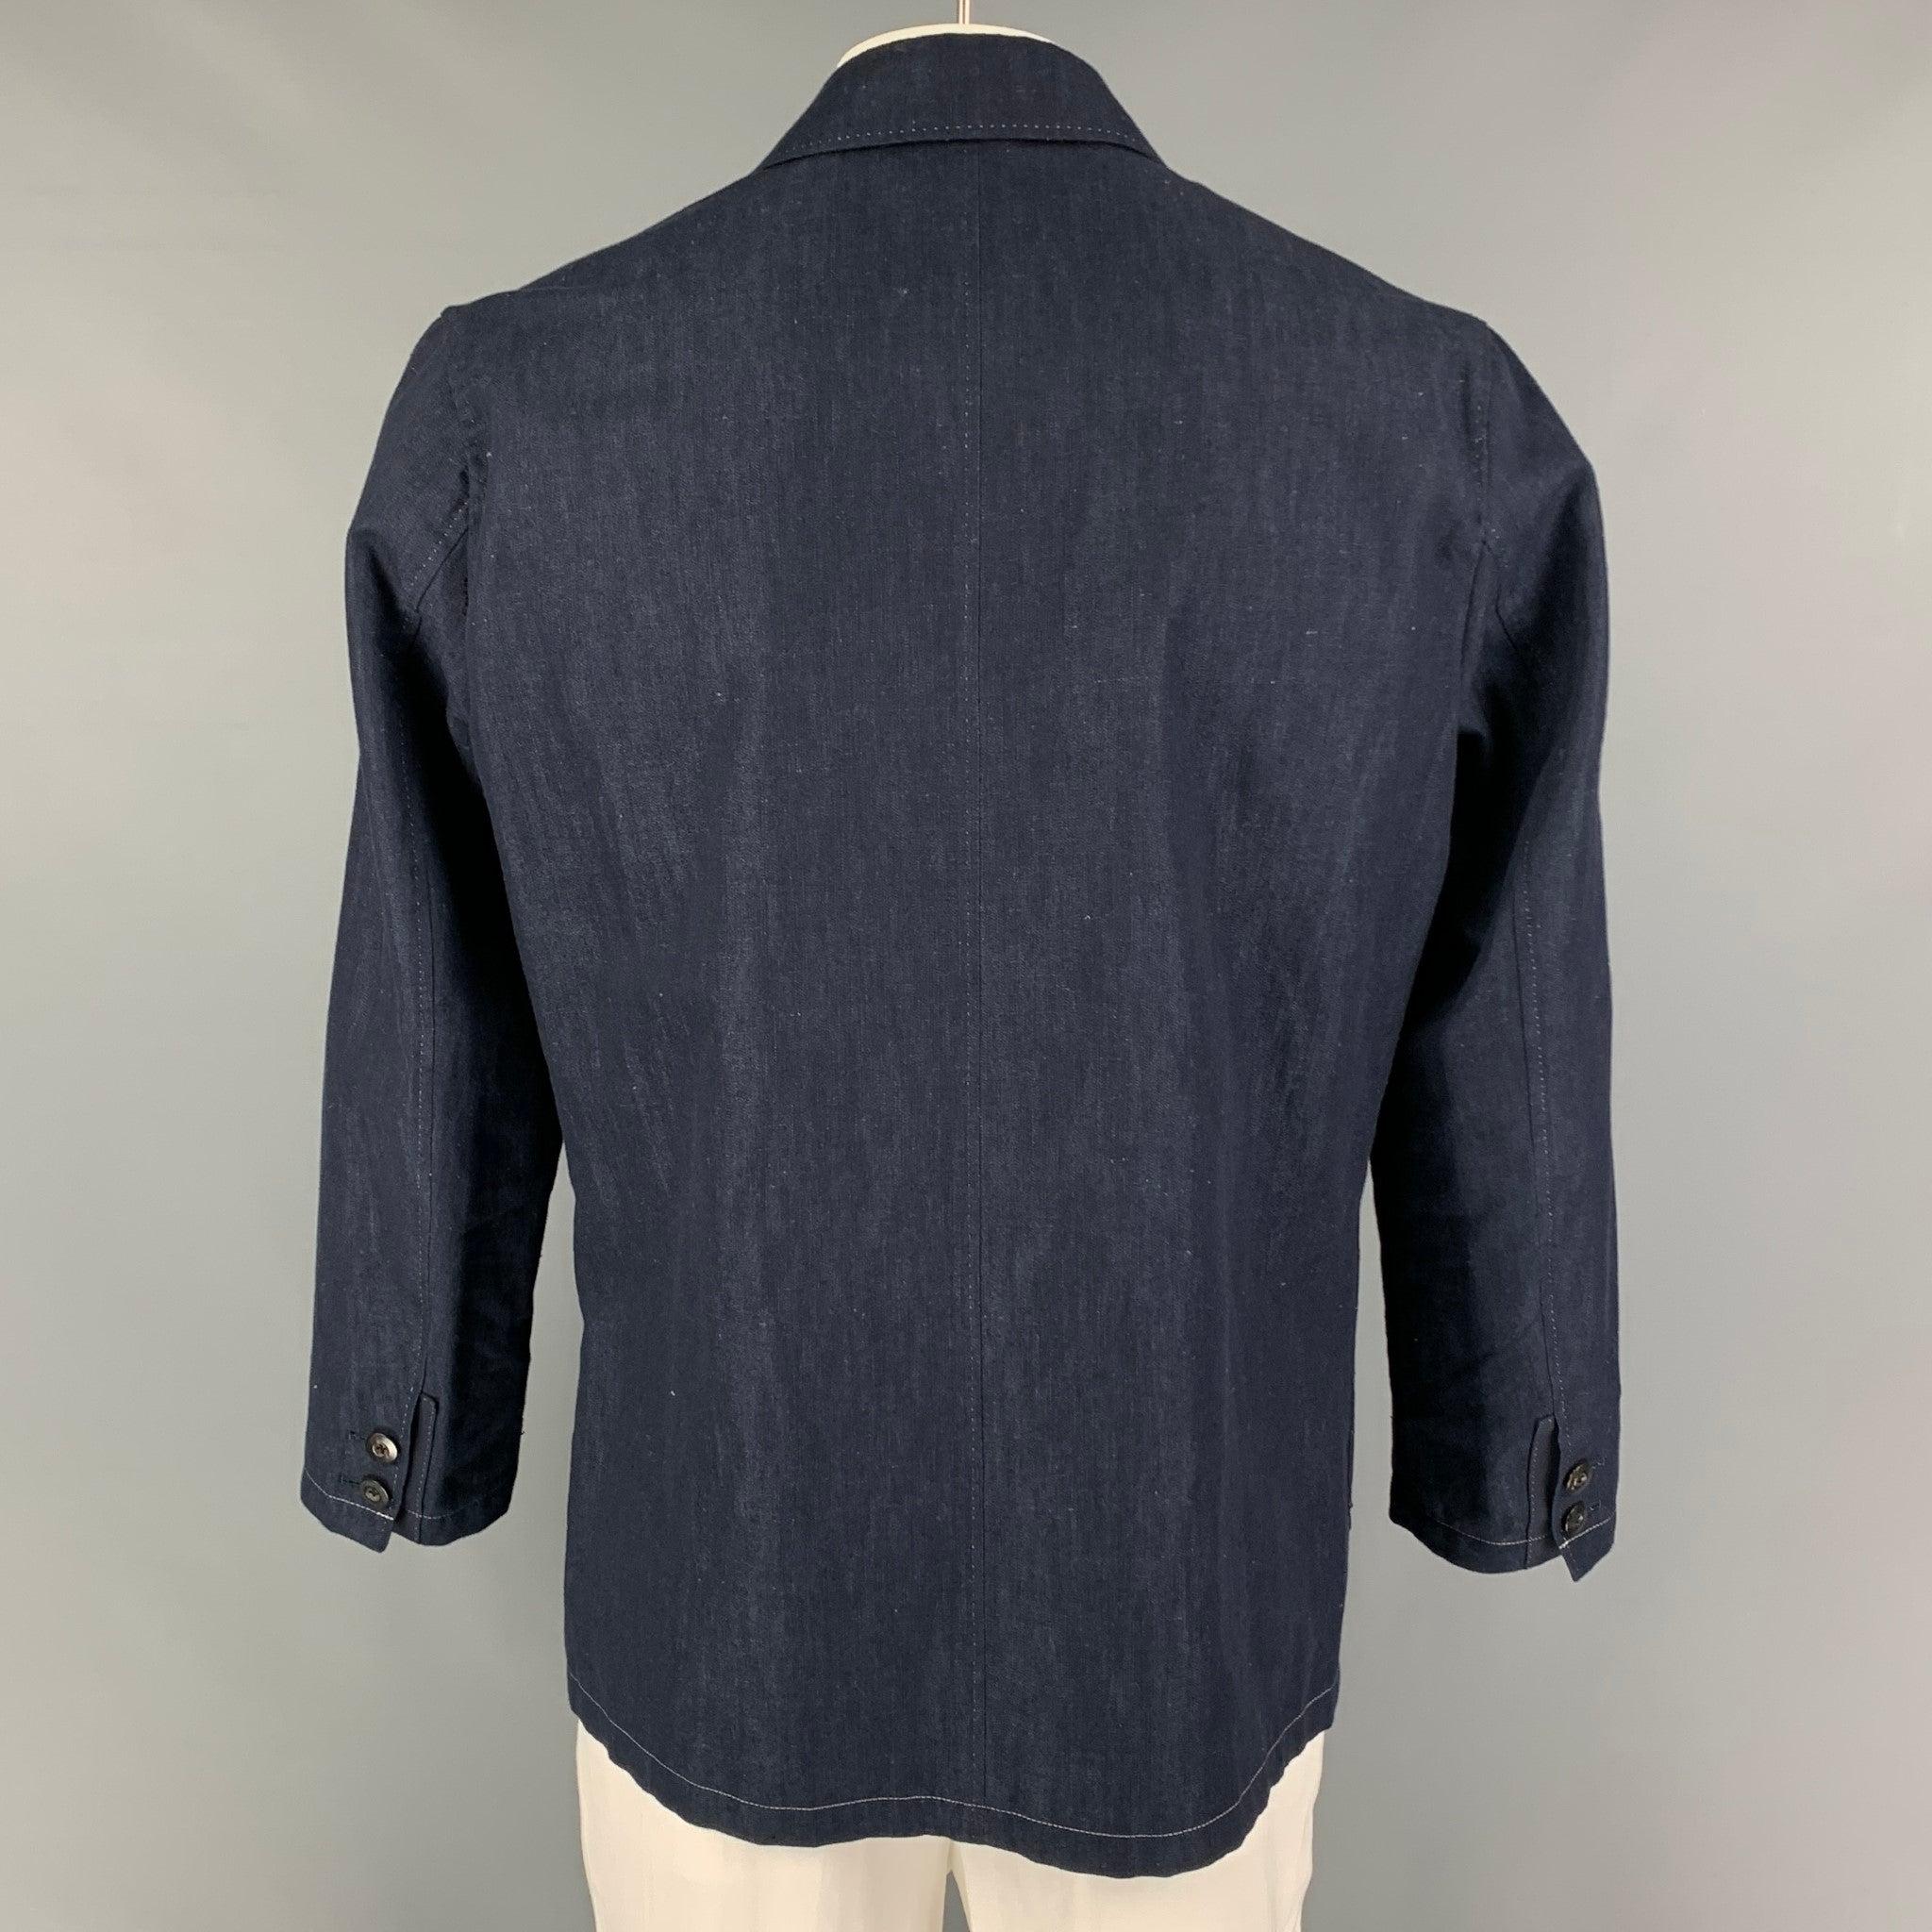 PAUL SMITH Size L Indigo Contrast Stitch Cotton Blend Notch Lapel Jacket In Good Condition For Sale In San Francisco, CA